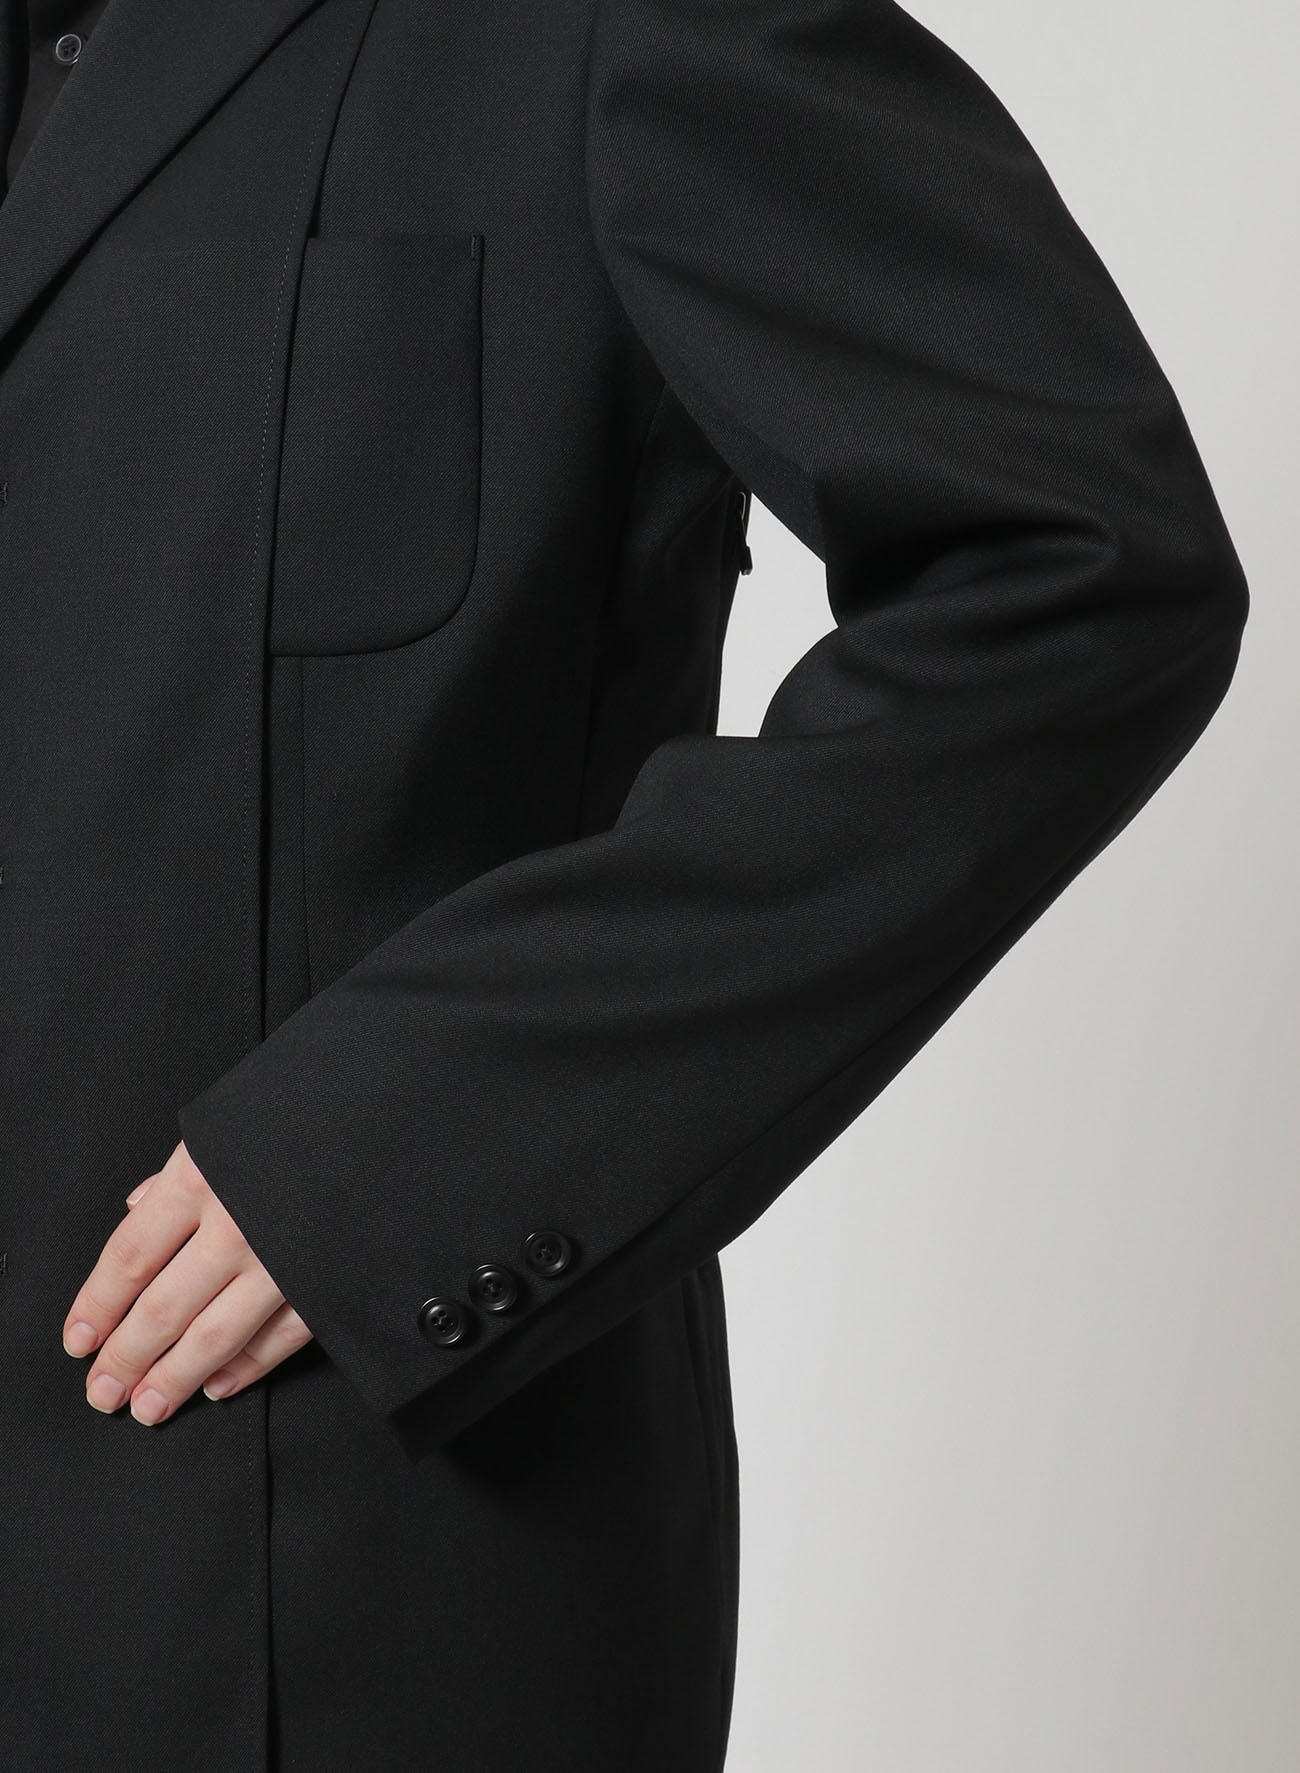 [Y's-Black Name] WOOL GABARDINE JACKET WITH ZIPPER DETAILS AND TRANSFORMING COLLAR